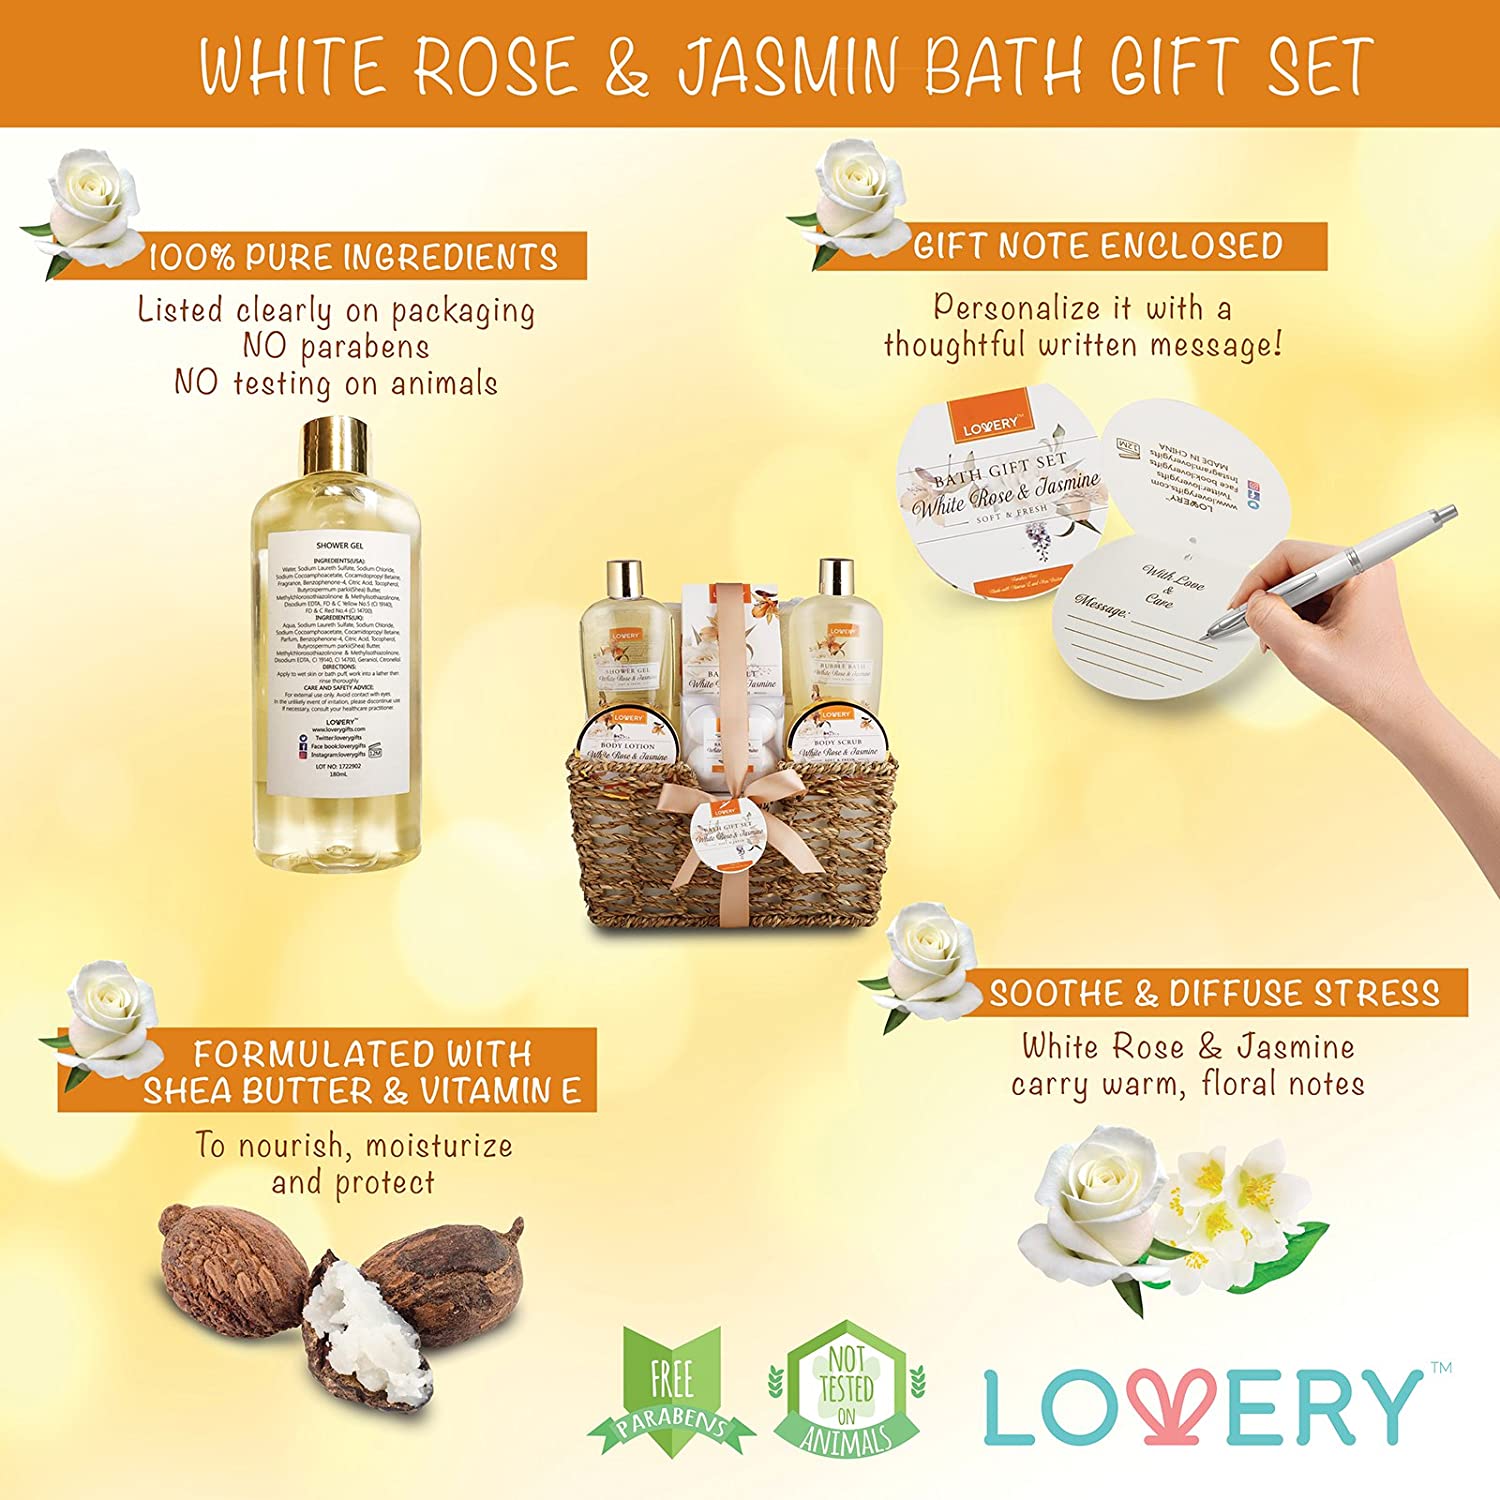 Lovery White Rose & Jasmine Bath Set, White Rose & Jasmine Gift Set, Home Bath Set, Bath Kit, Bath Cosmetics, All Natural, Vitamin E, Shea Butter, Self-Care Package, Hydrating Skin Care, Gift Bath Set, Perfect Gift, Spa Set, Spa Kit